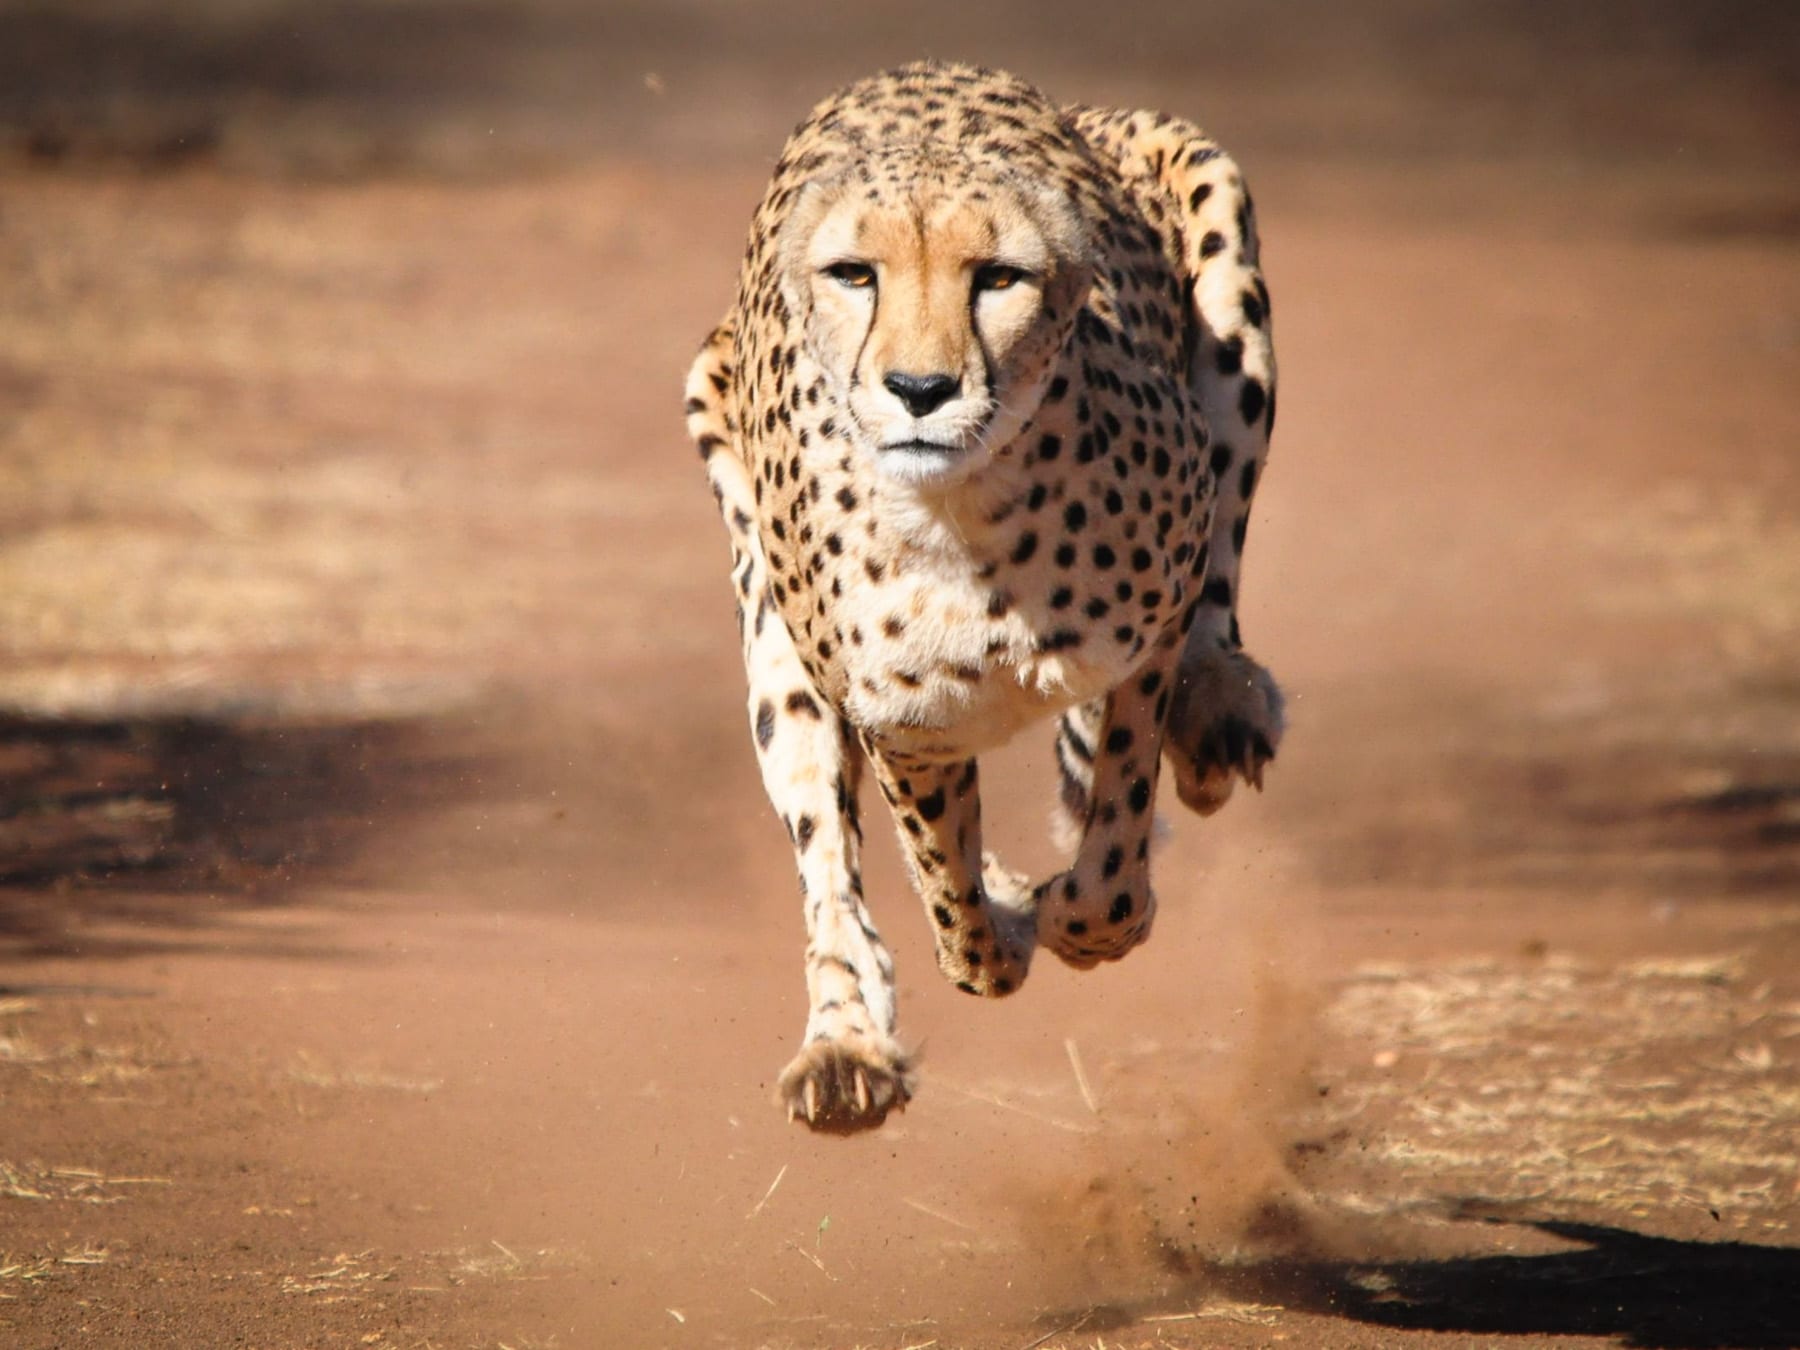 The cheetah can reach speeds of up to to 71 miles per hour.